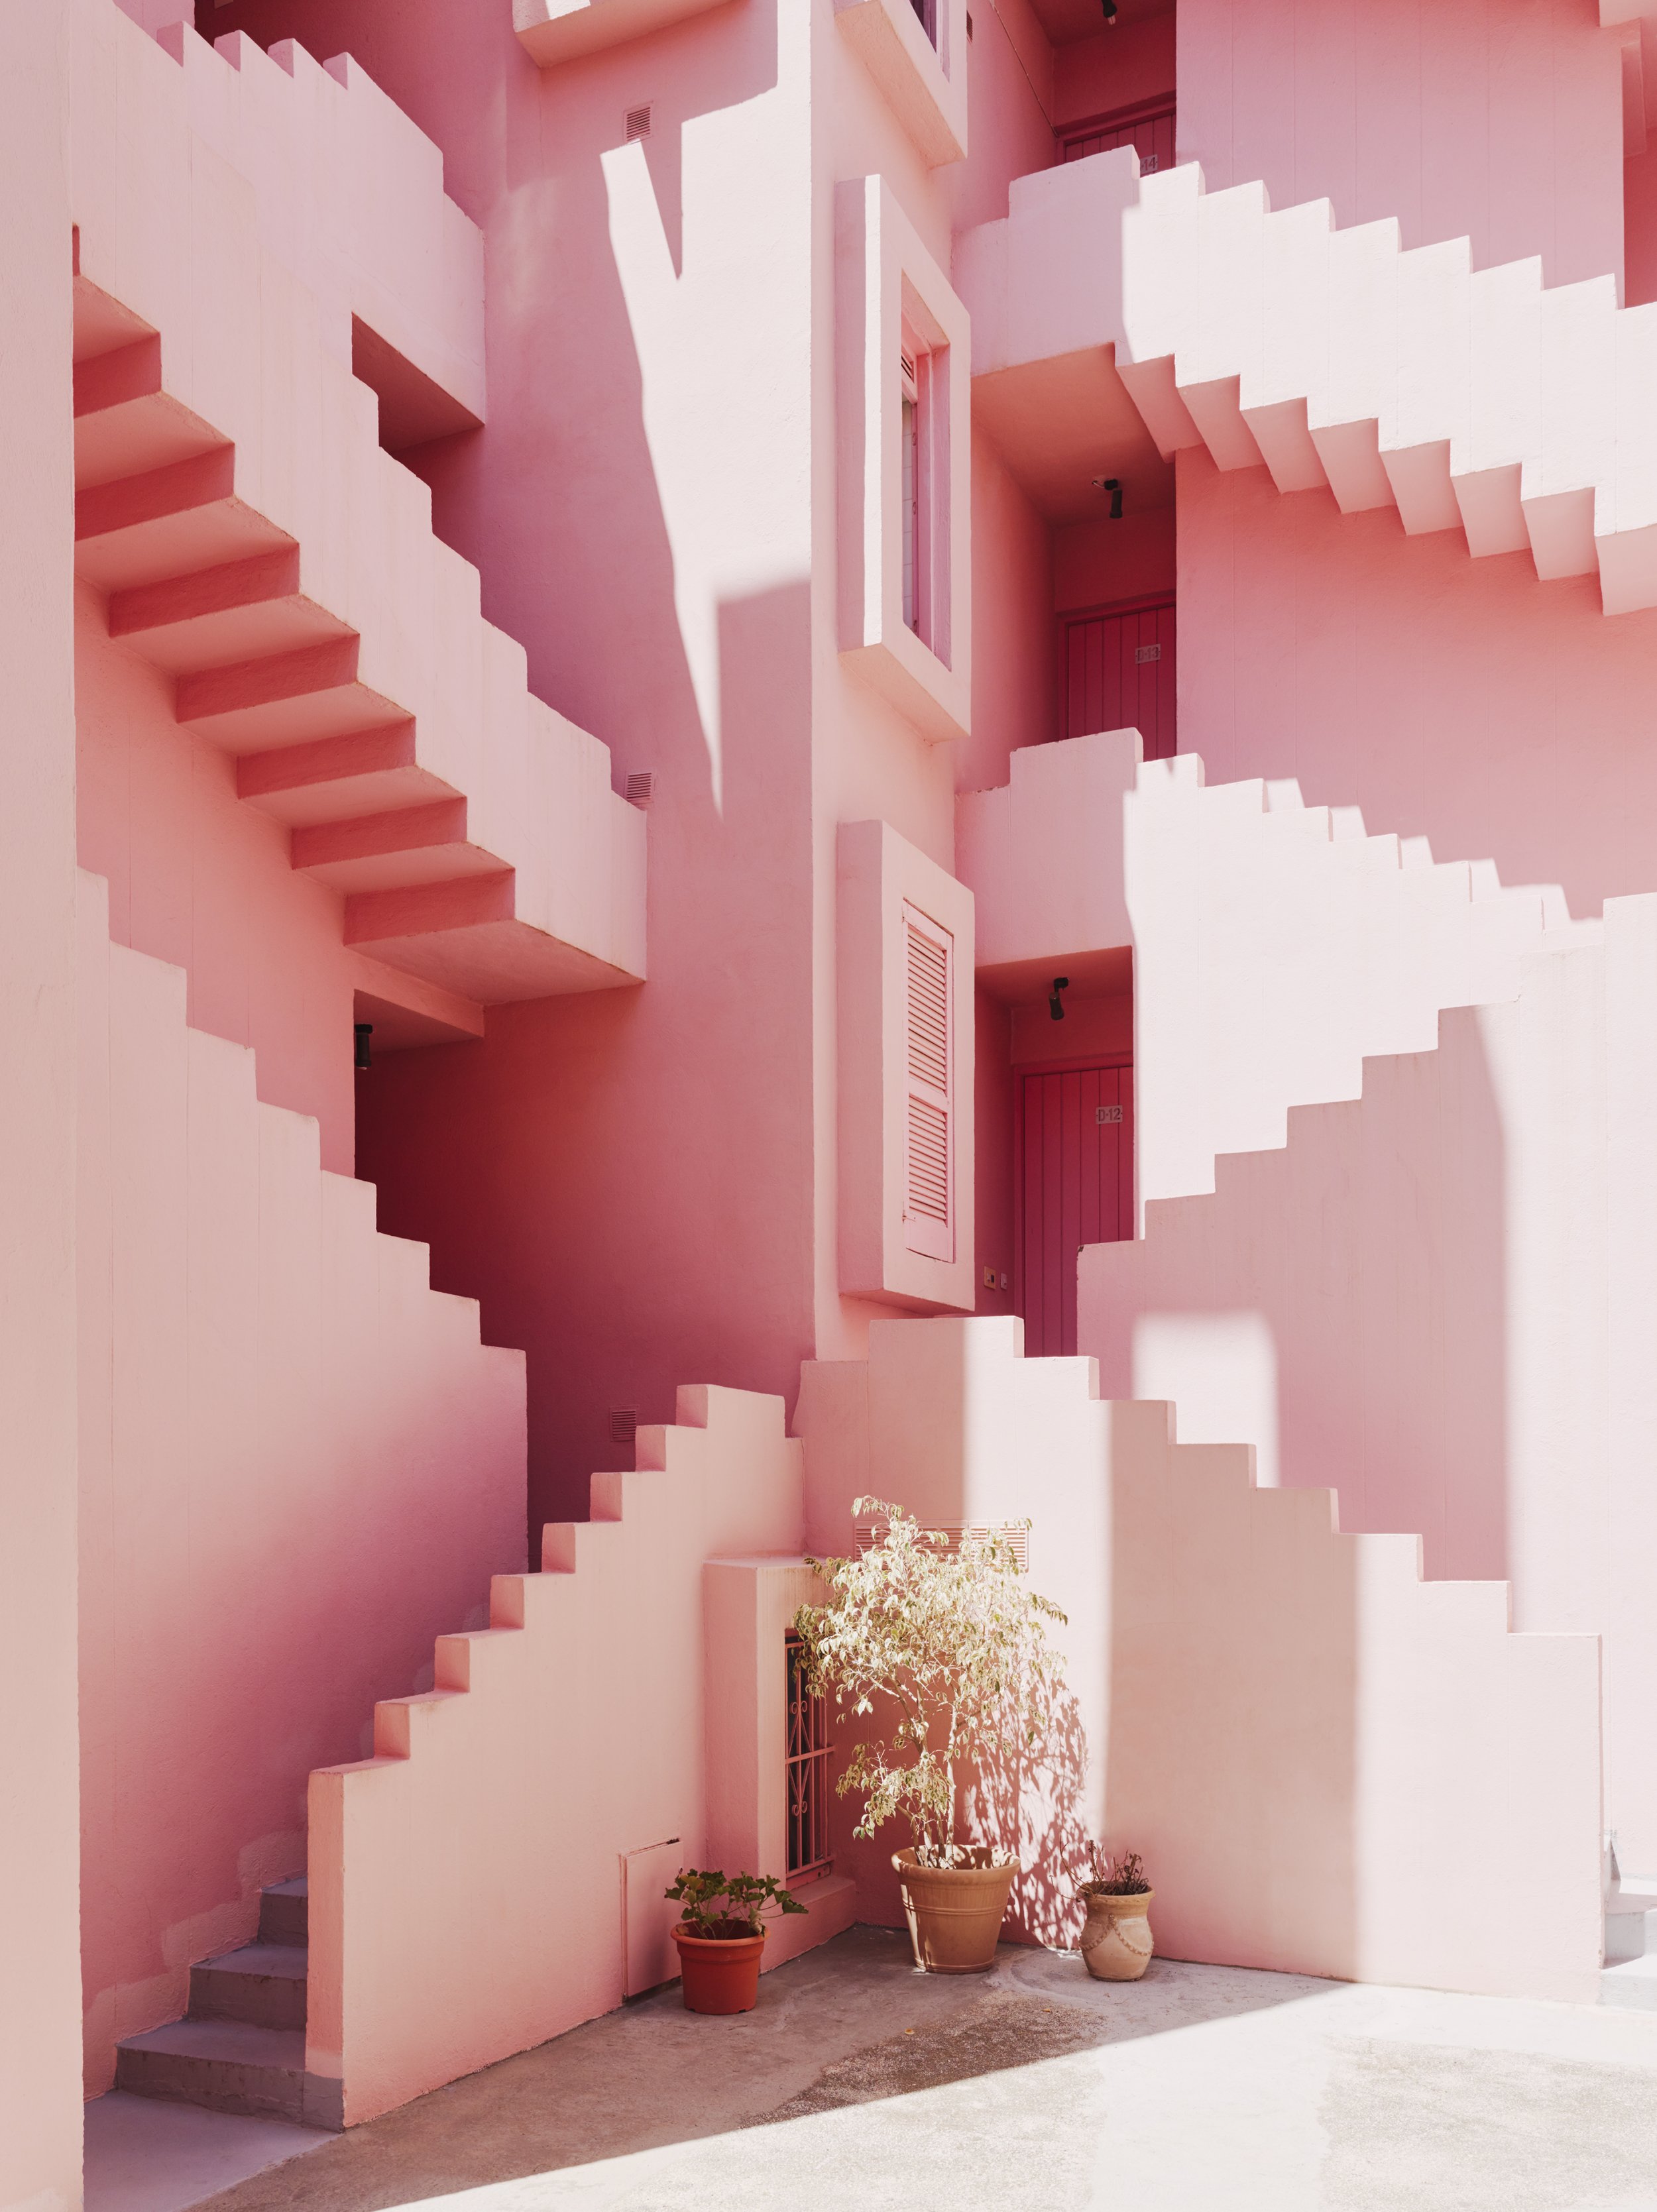 Dreams and Manifestos: The Architectural Vision of Ricardo Bofill